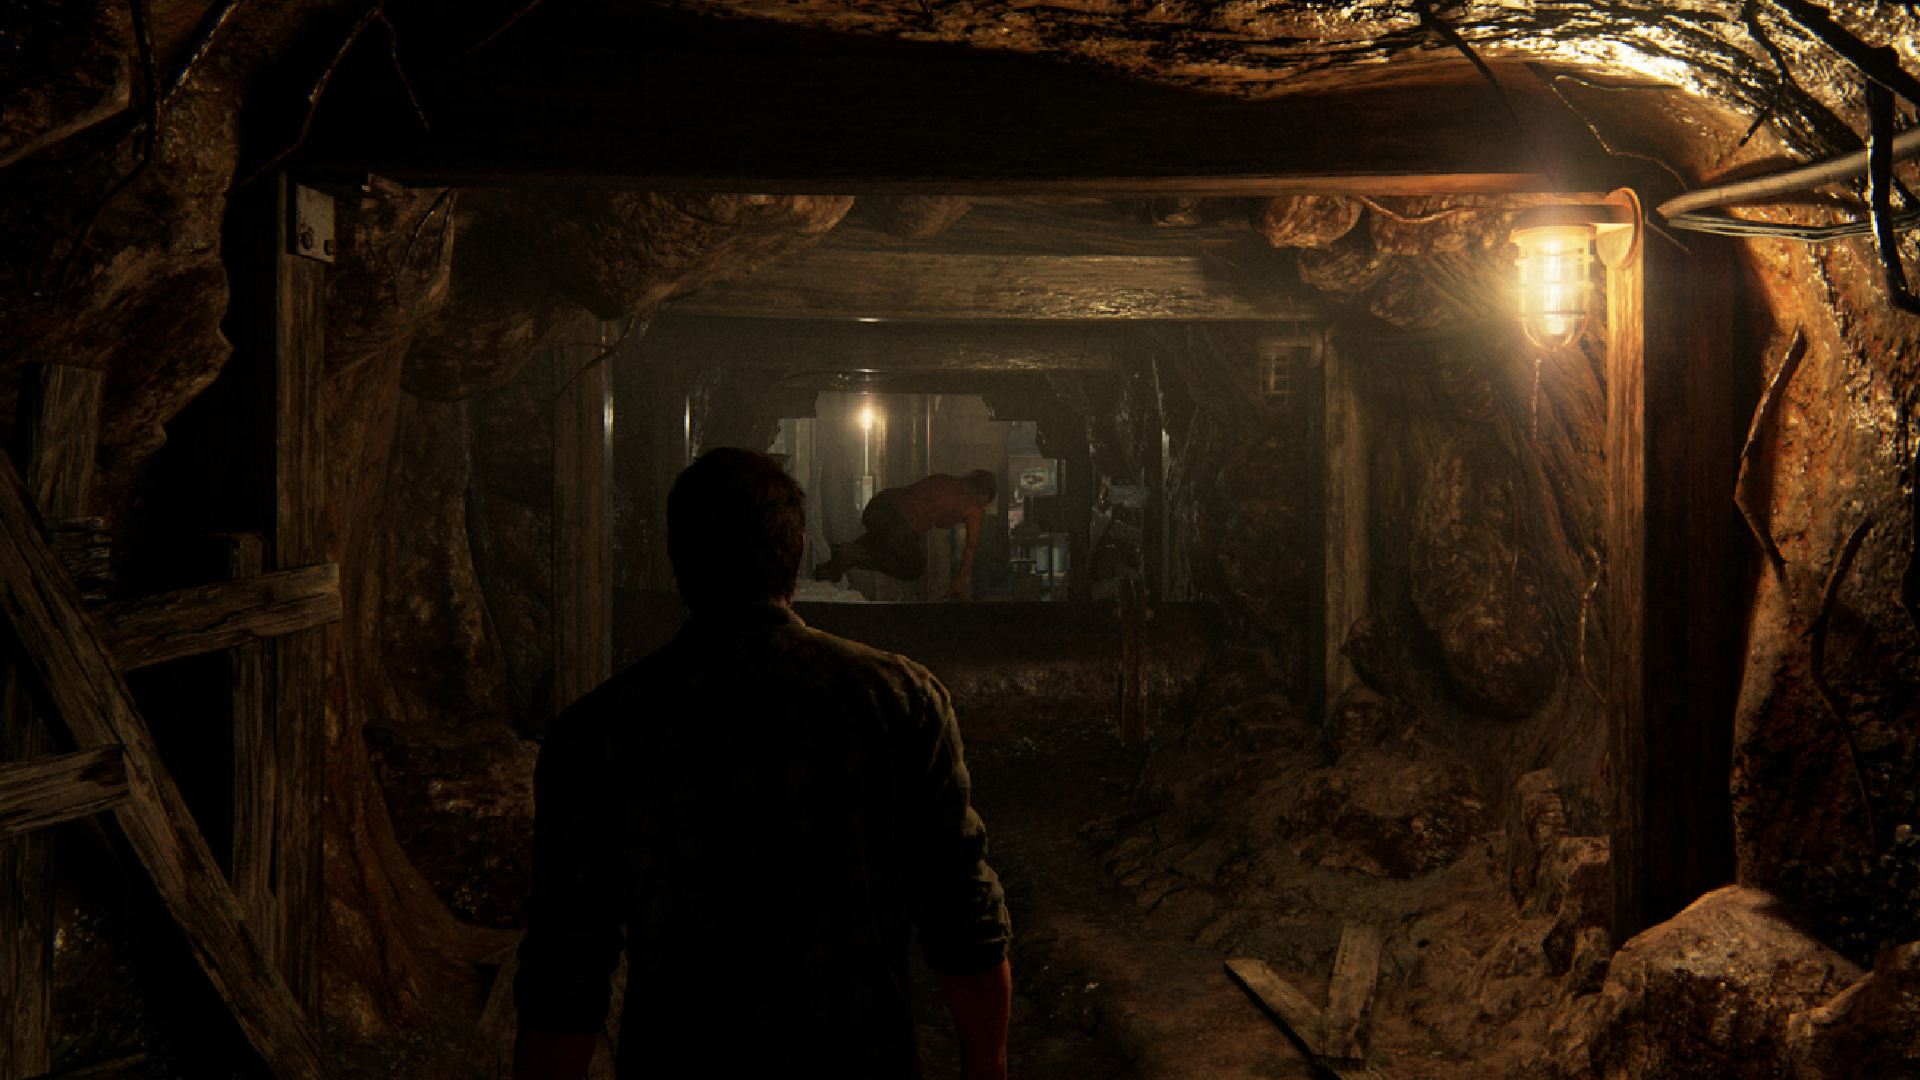 The Last of Us Part 1 Remake Review: Joel can be seen walking through an underground tunnel